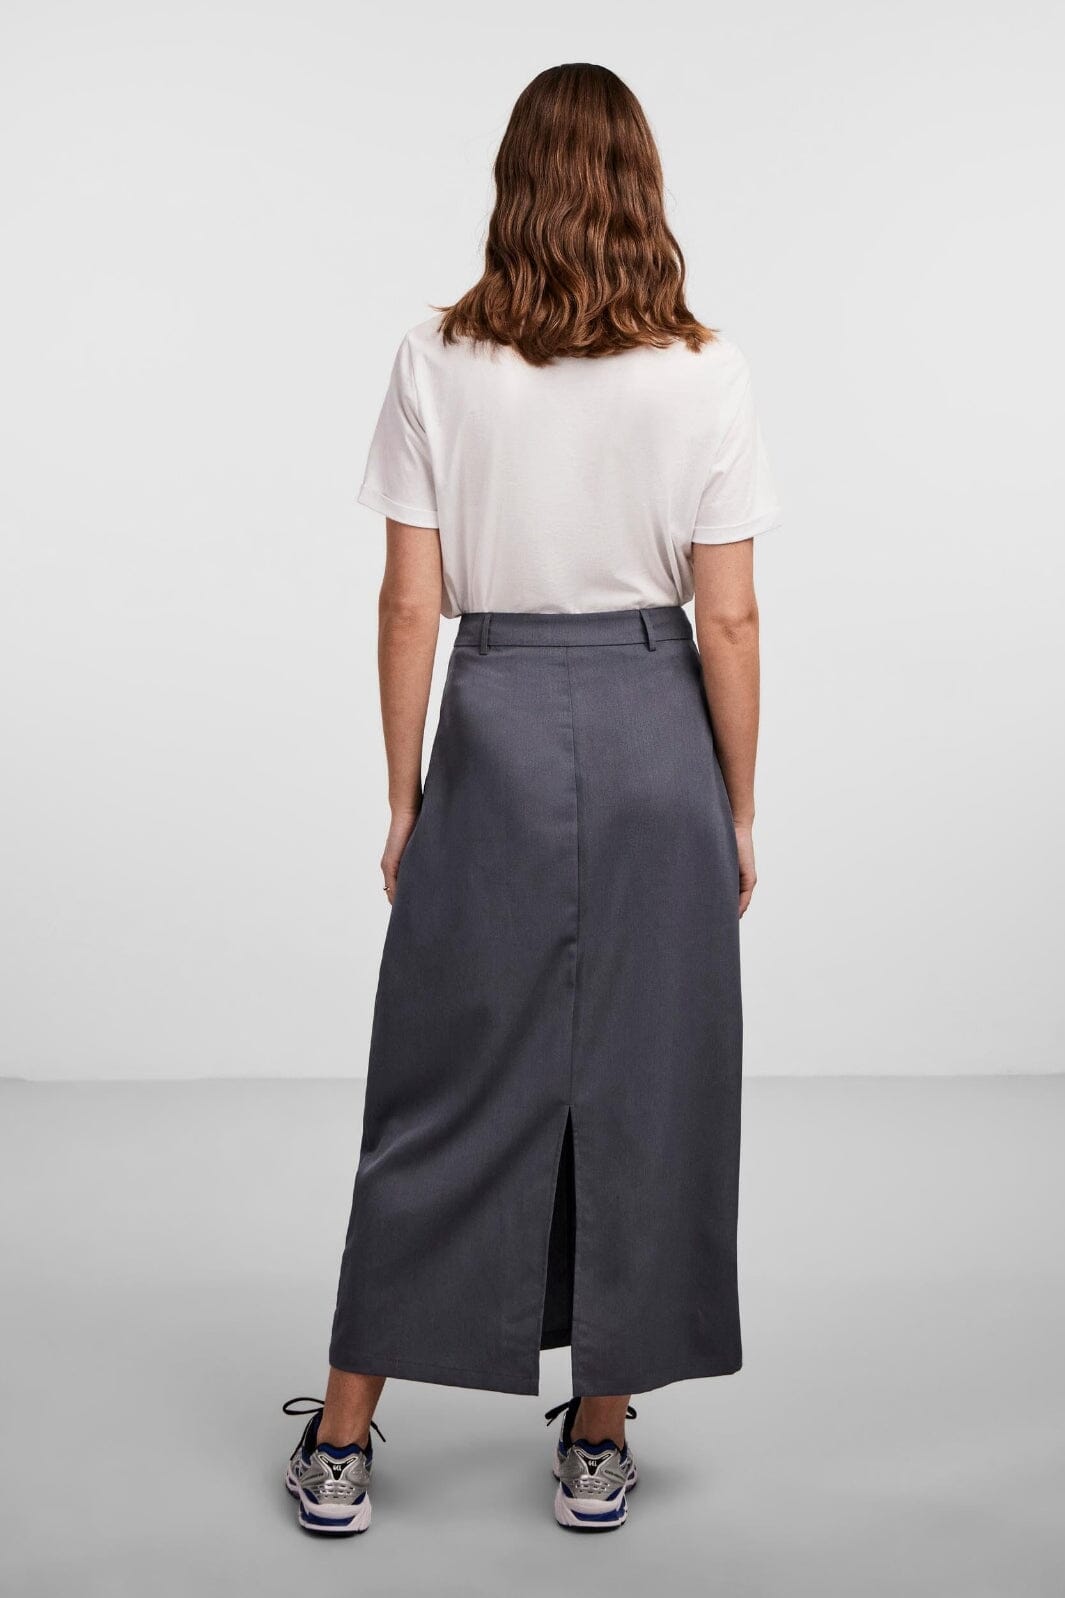 Pieces - Pcmoa Hw Midi Skirt - Ultimate grey Nederdele 